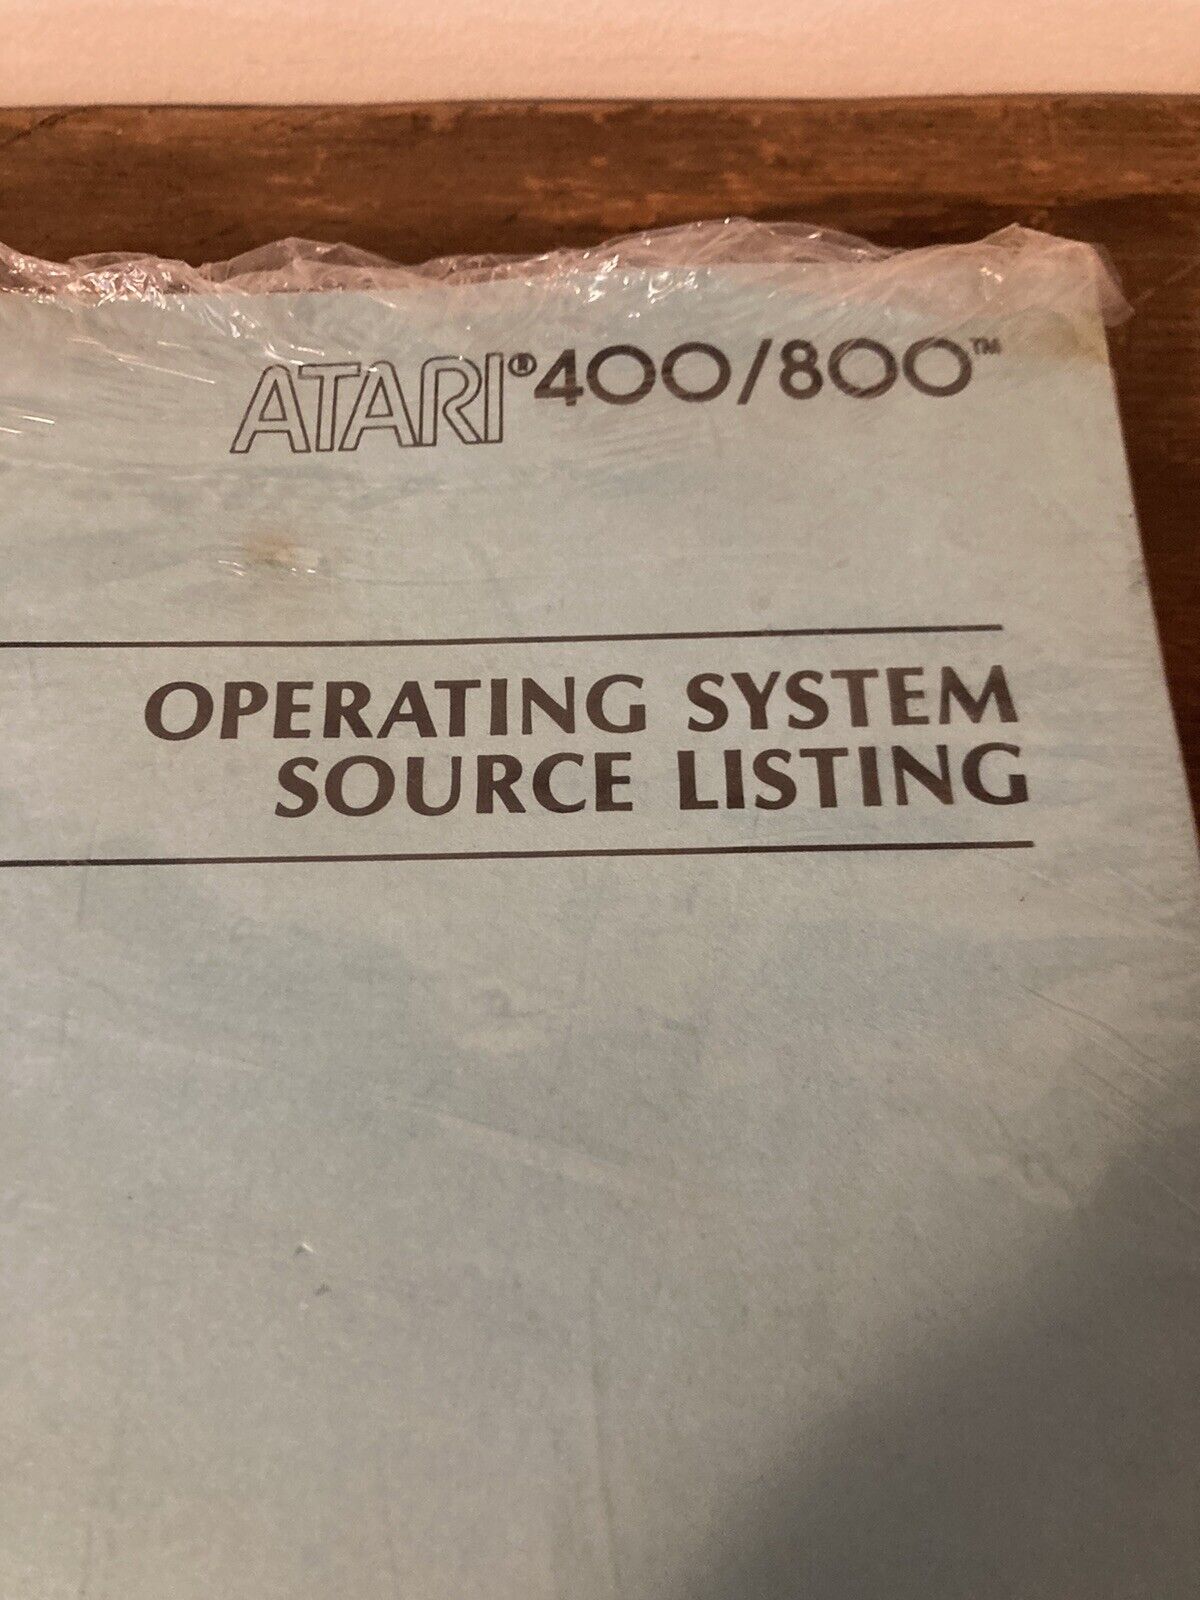 VERY RARE NEW IN PACKAGE Atari 400/800 Operating System Source Listing